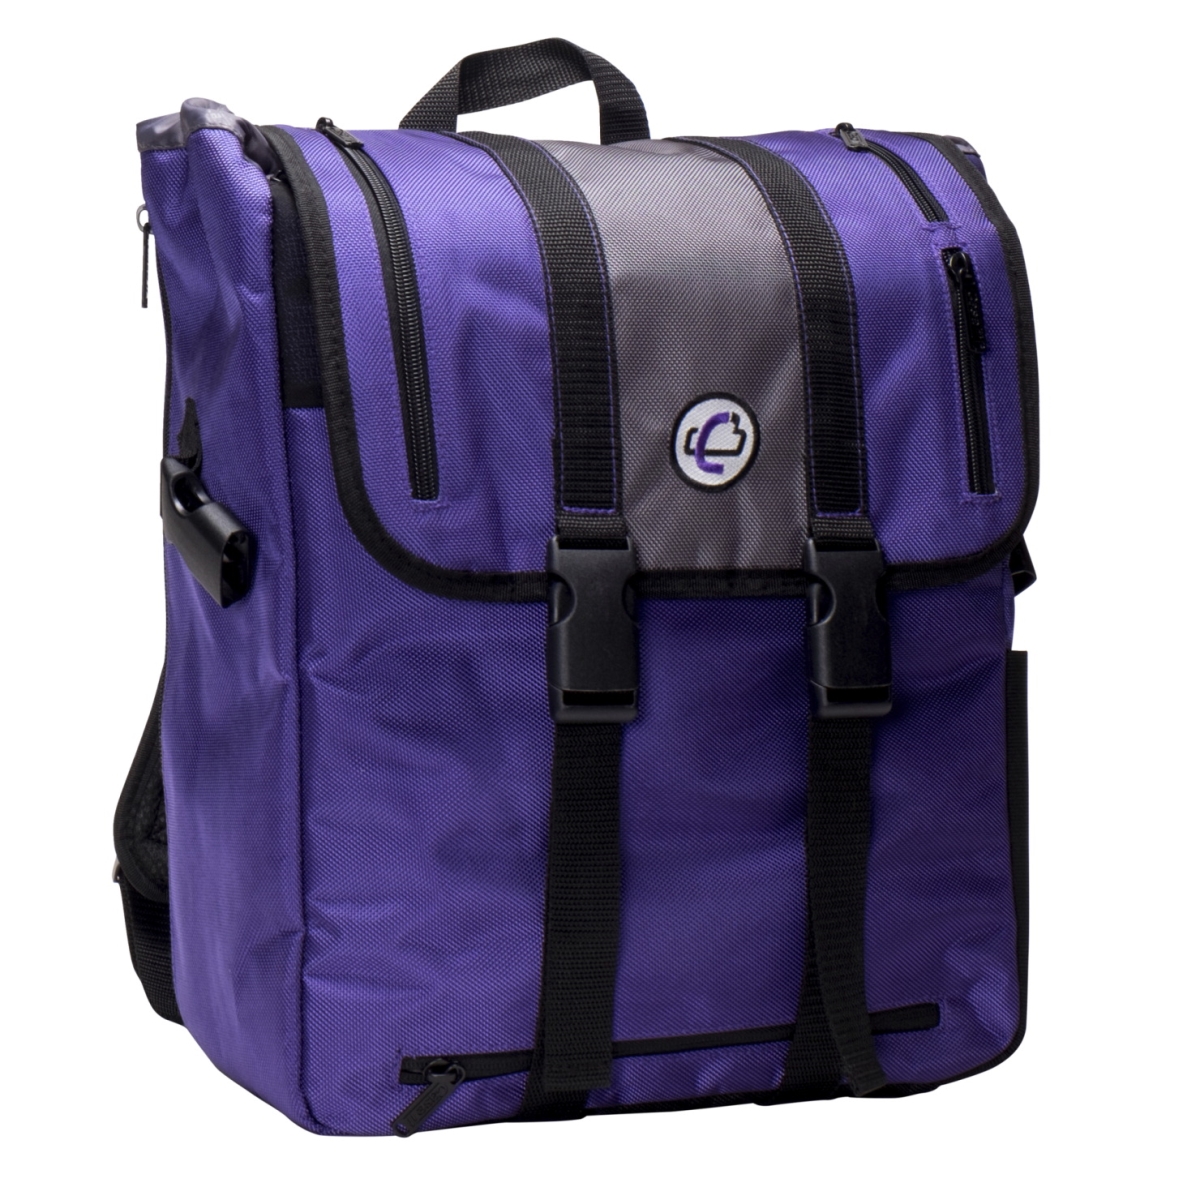 2004446 6 X 13 X 15 In. Backpack With Binder Holder, Purple With Grey Trim